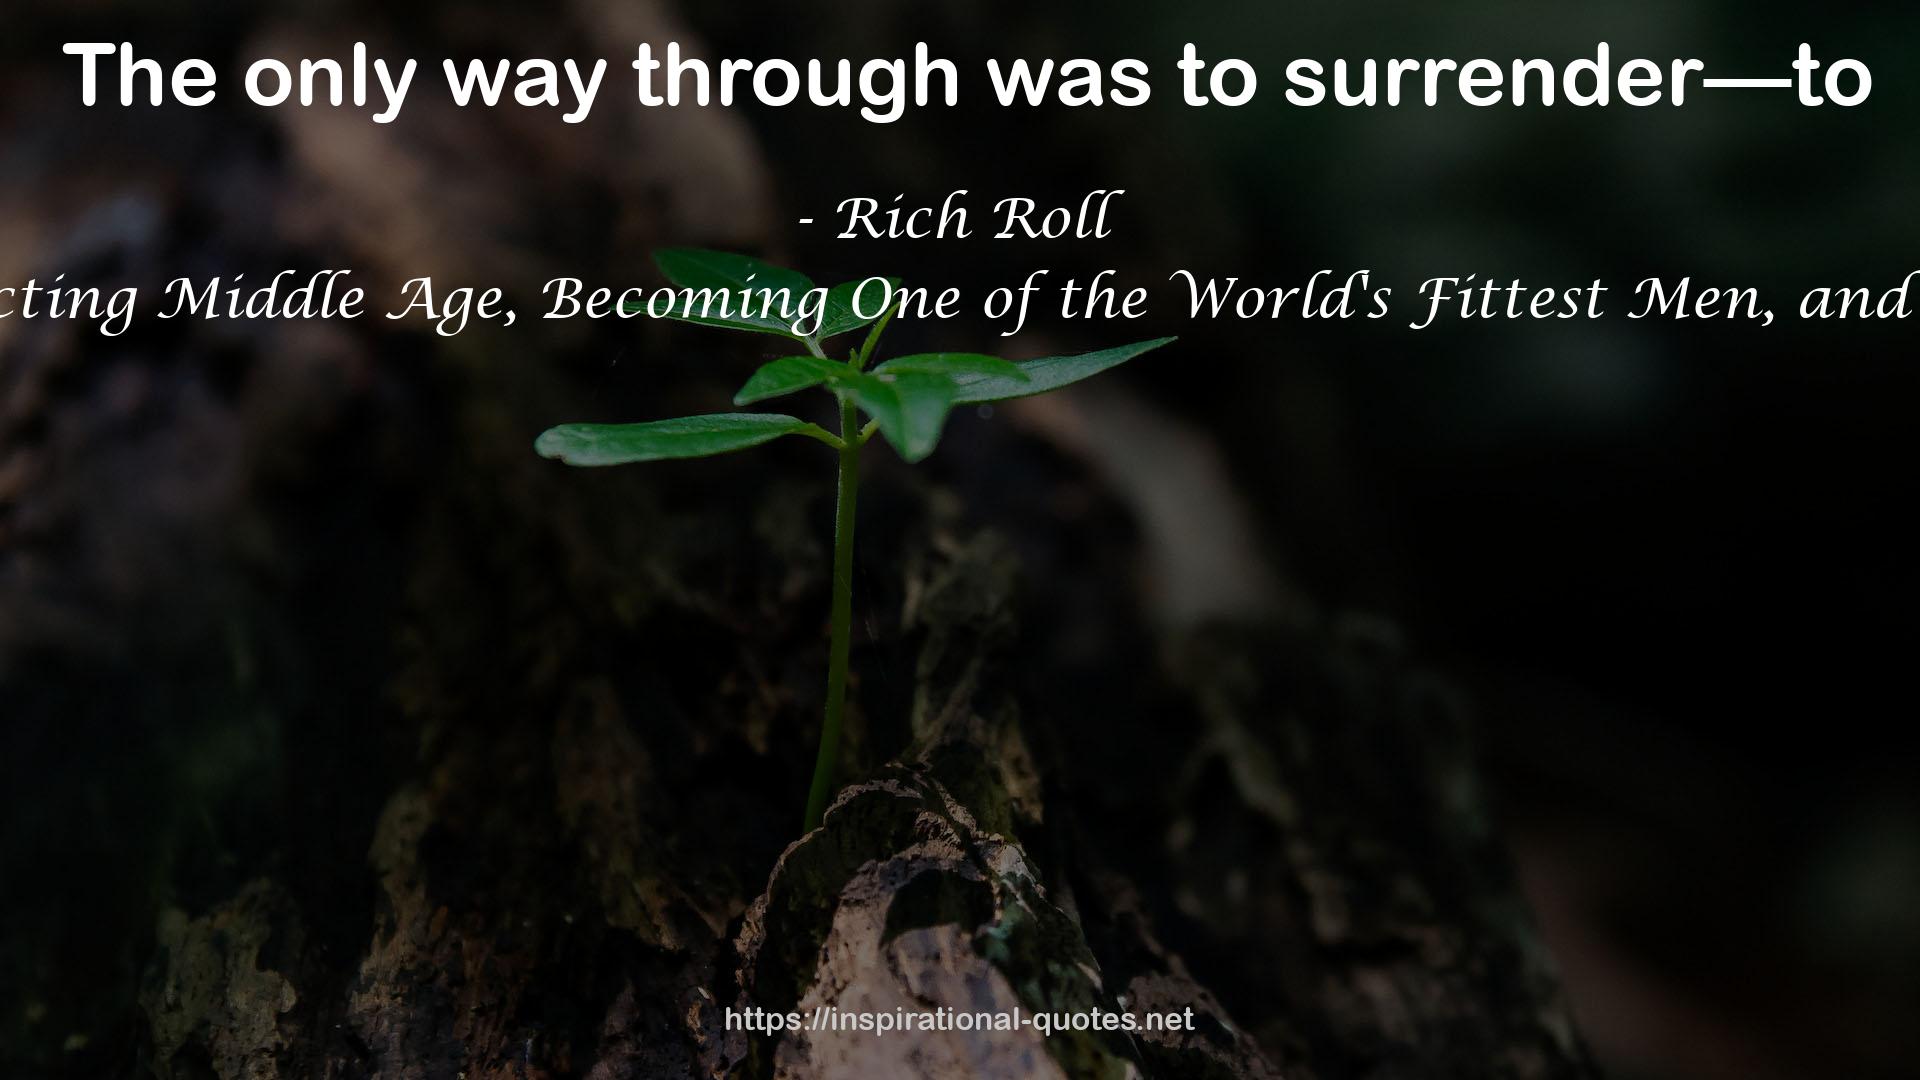 Rich Roll QUOTES